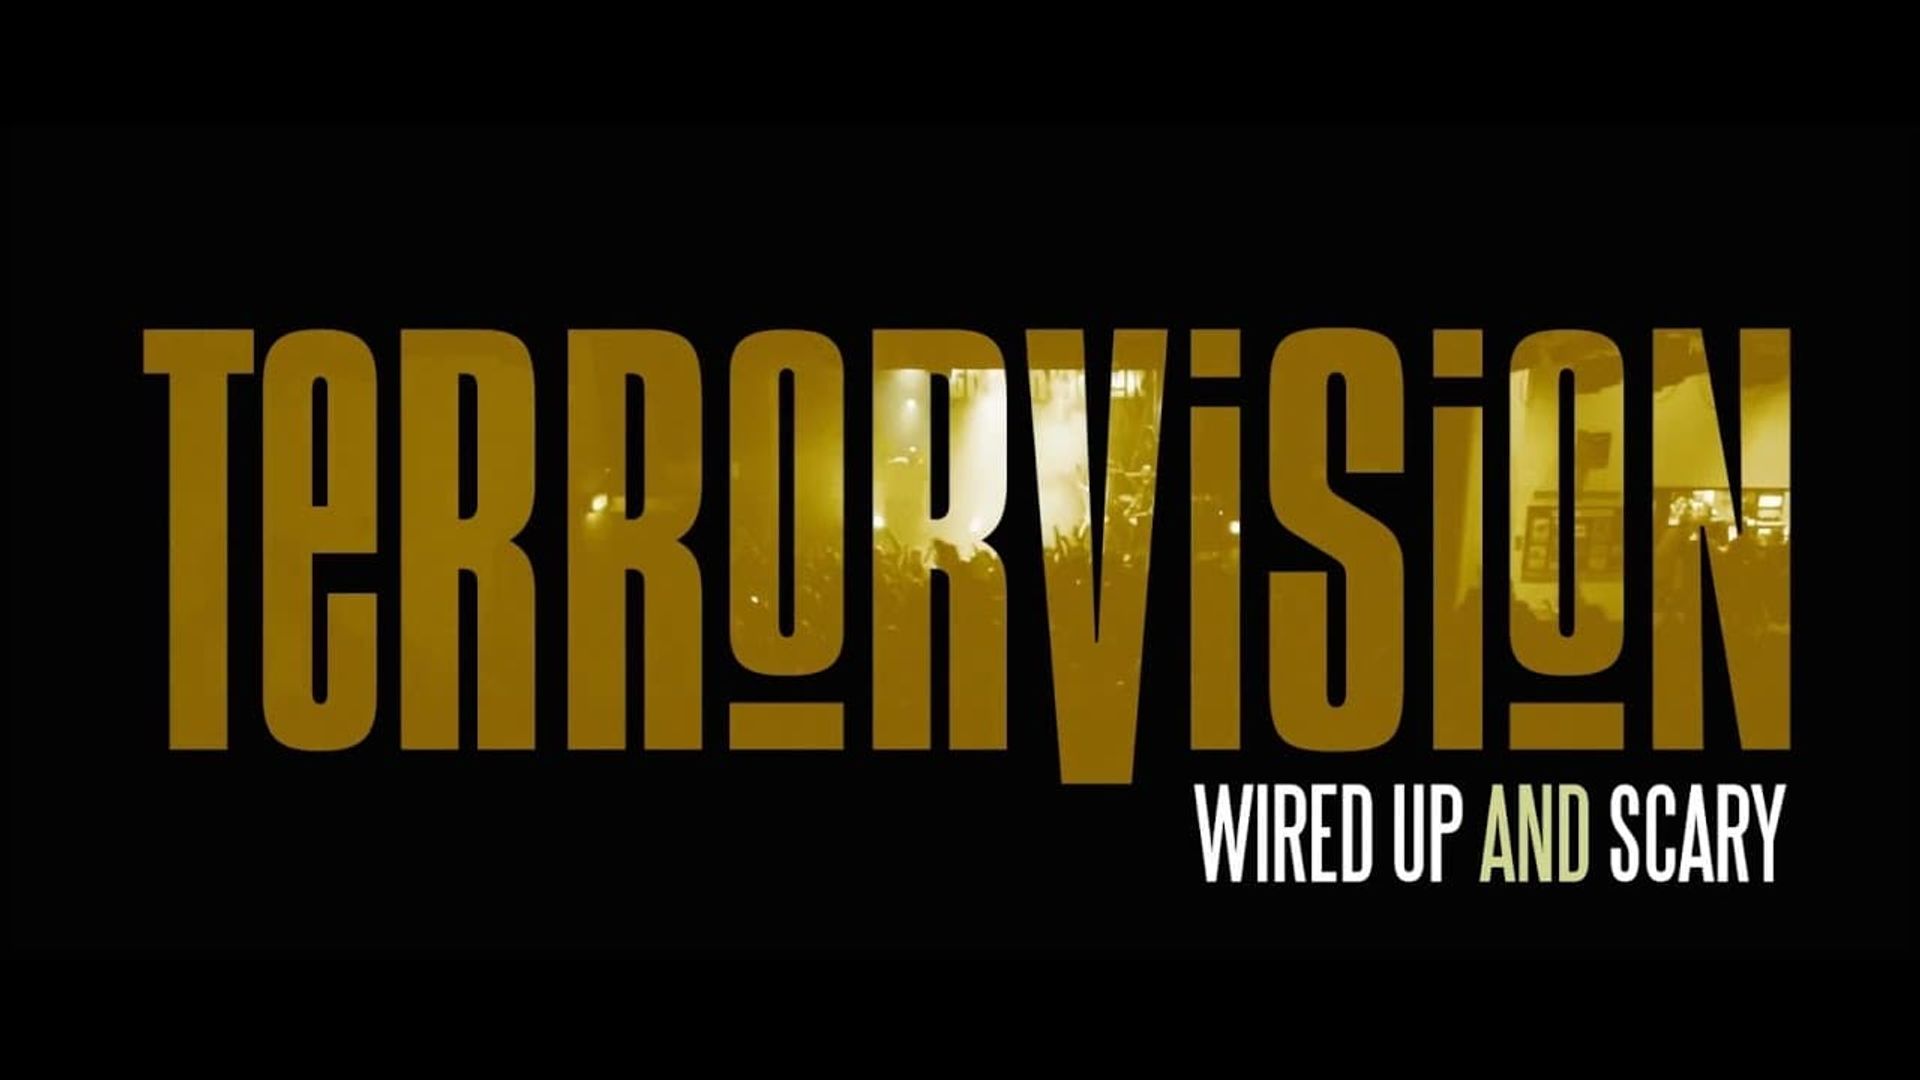 Terrorvision: Wired Up and Scary background